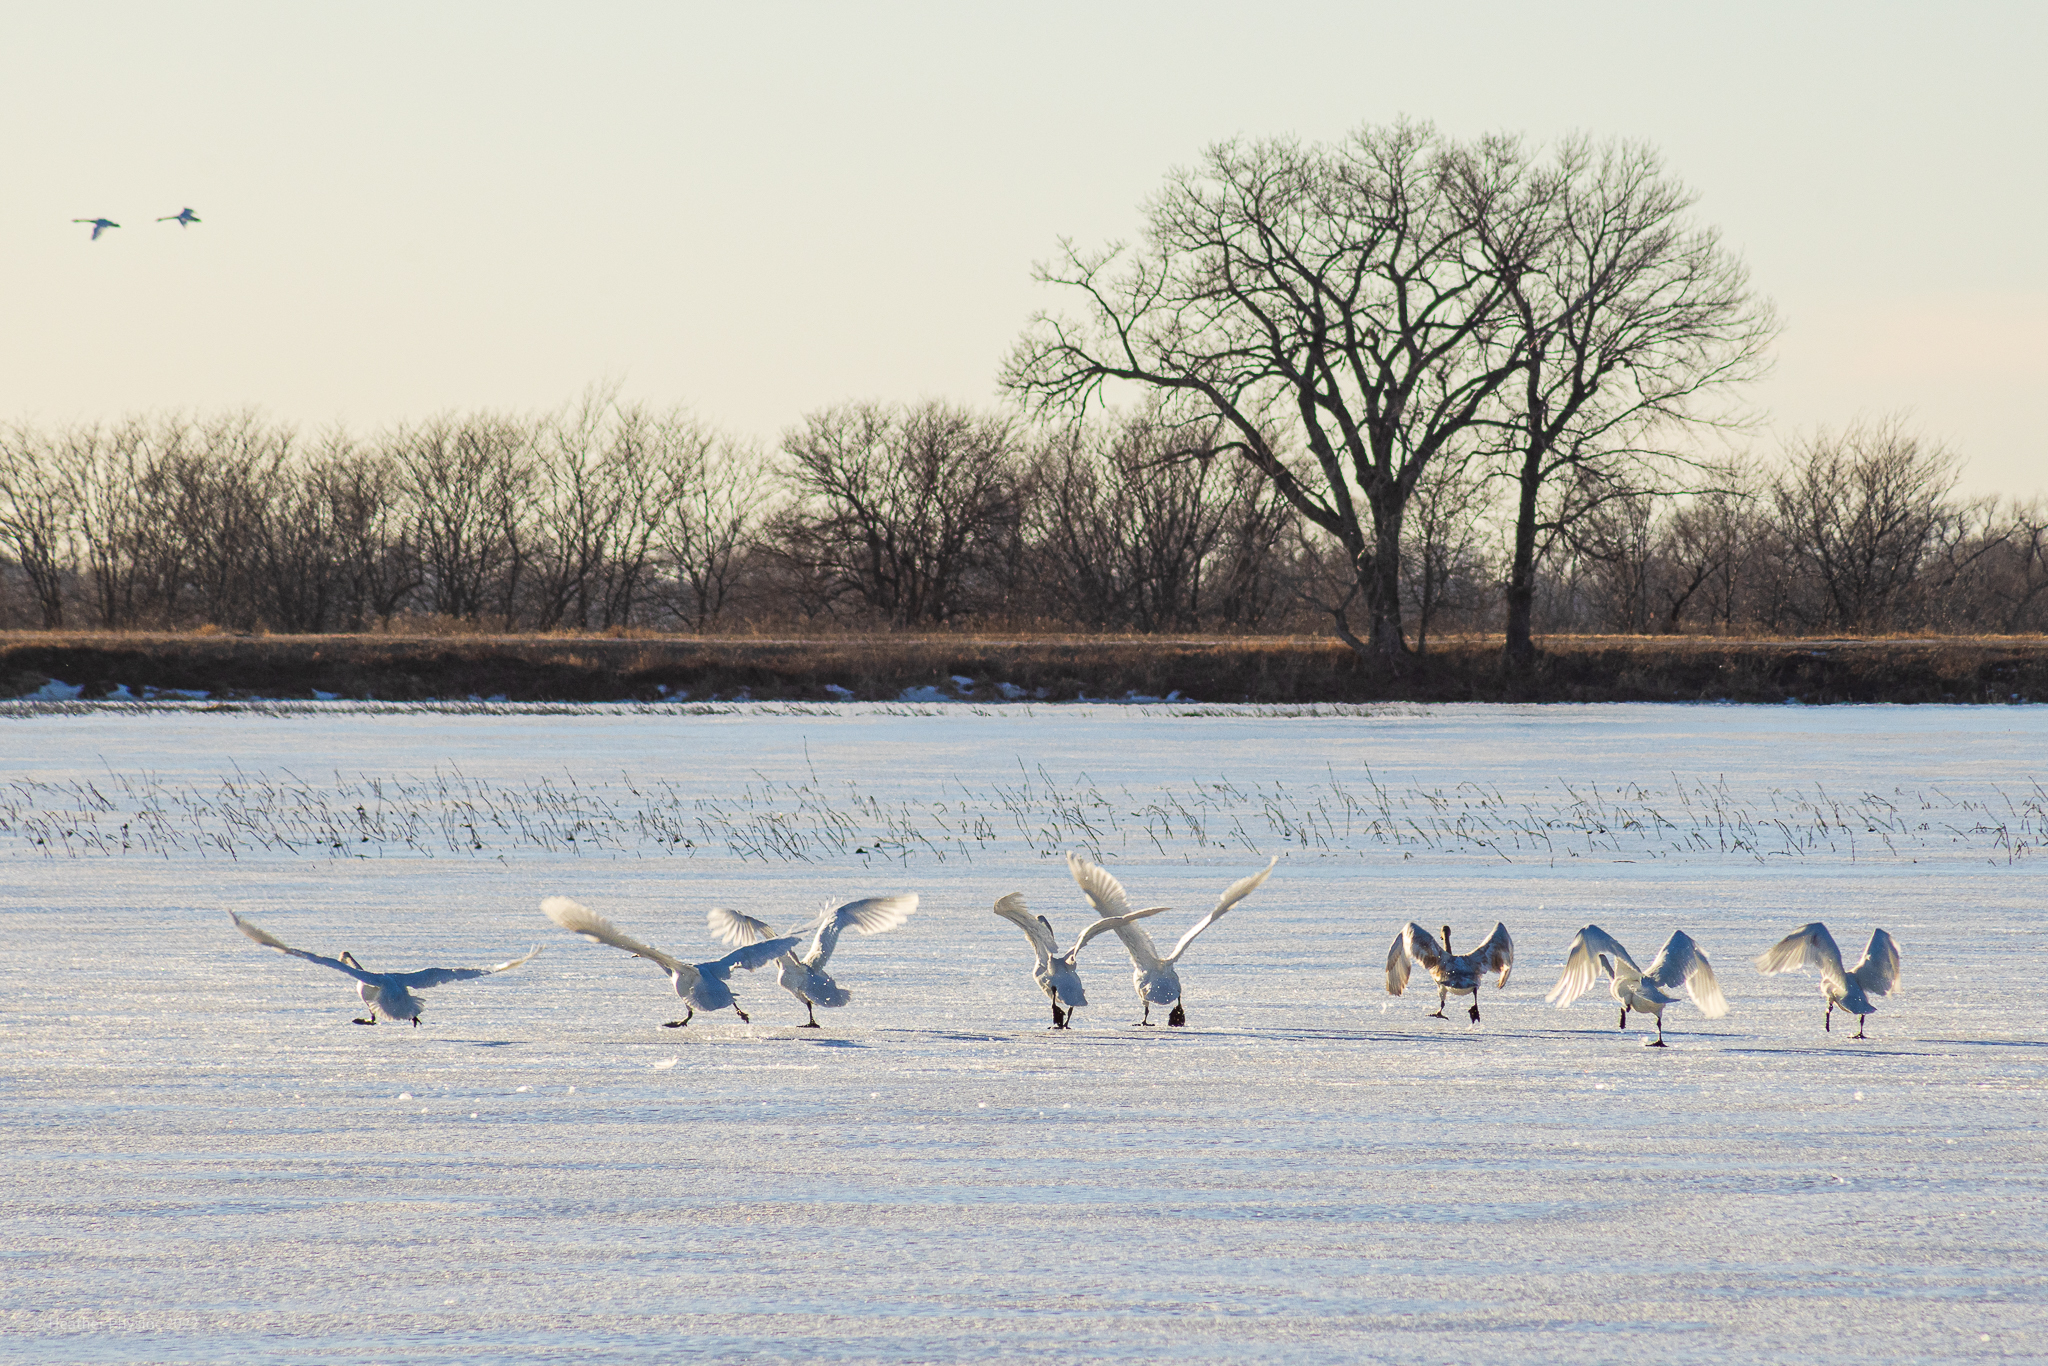 Snow Geese Preparing for Flight on Frozen Pond at Loess Bluffs National Wildlife Refuge